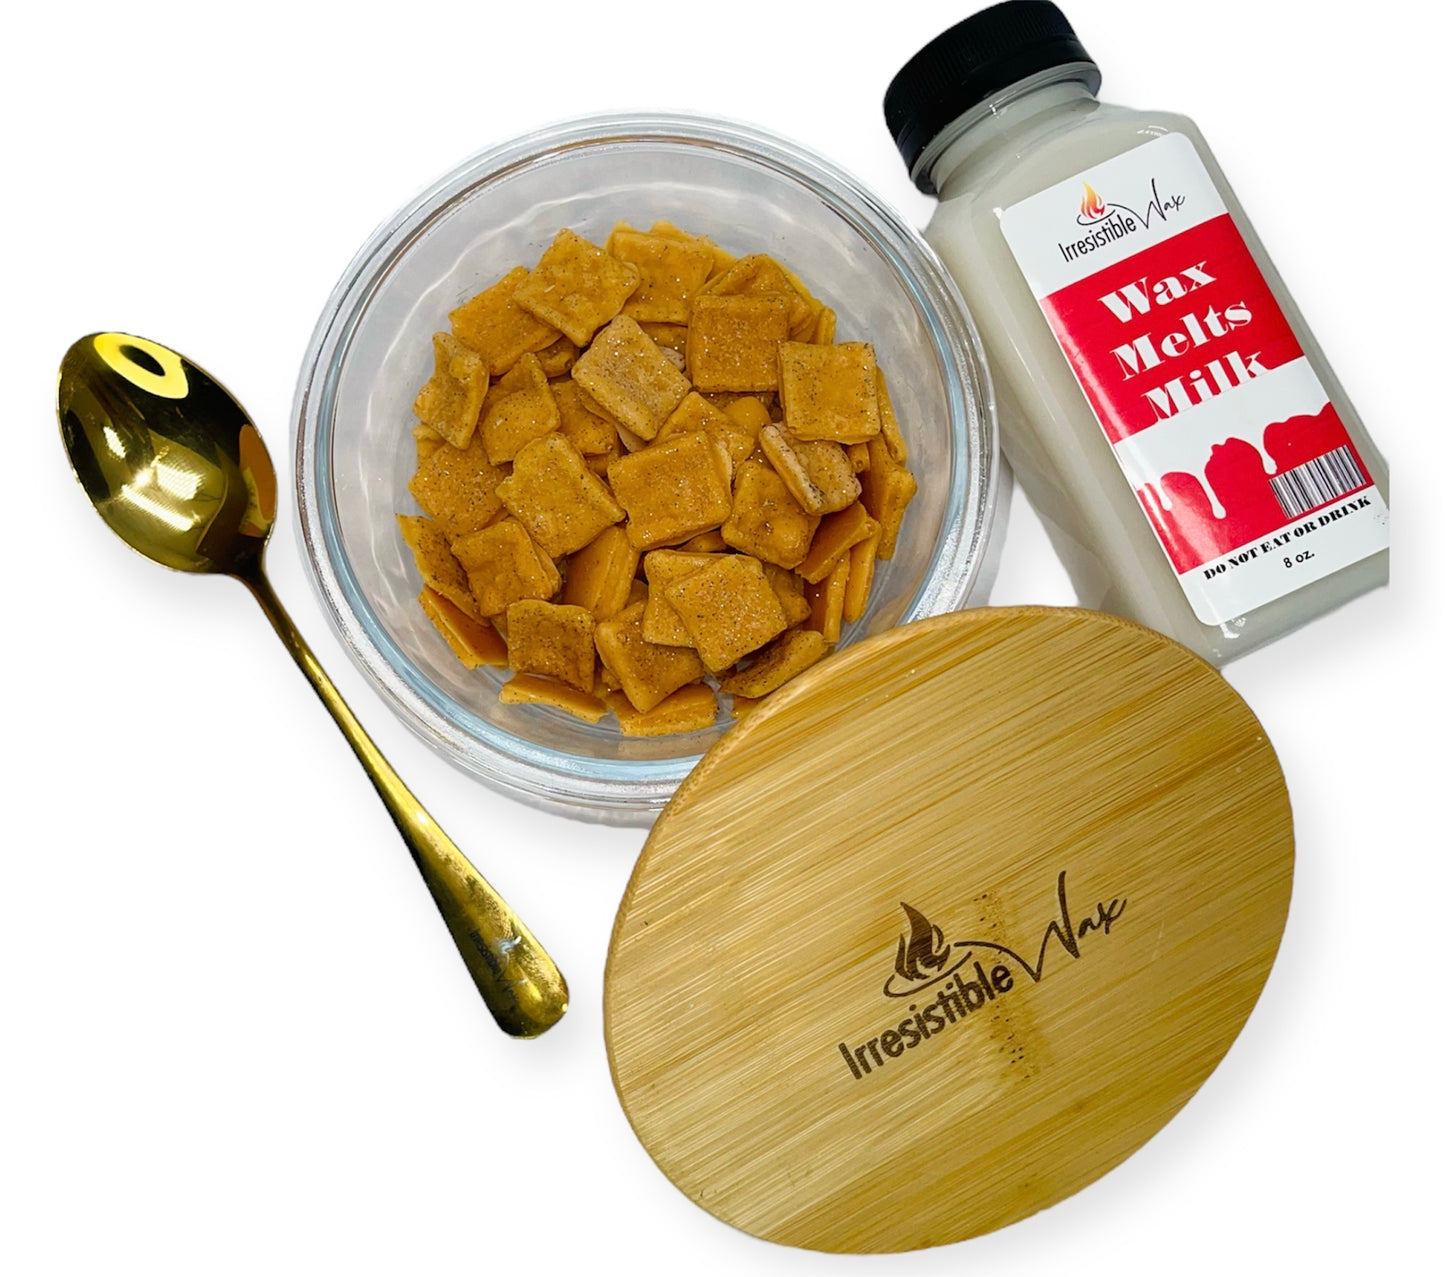 Cereal and Milk Combo Wax Melts